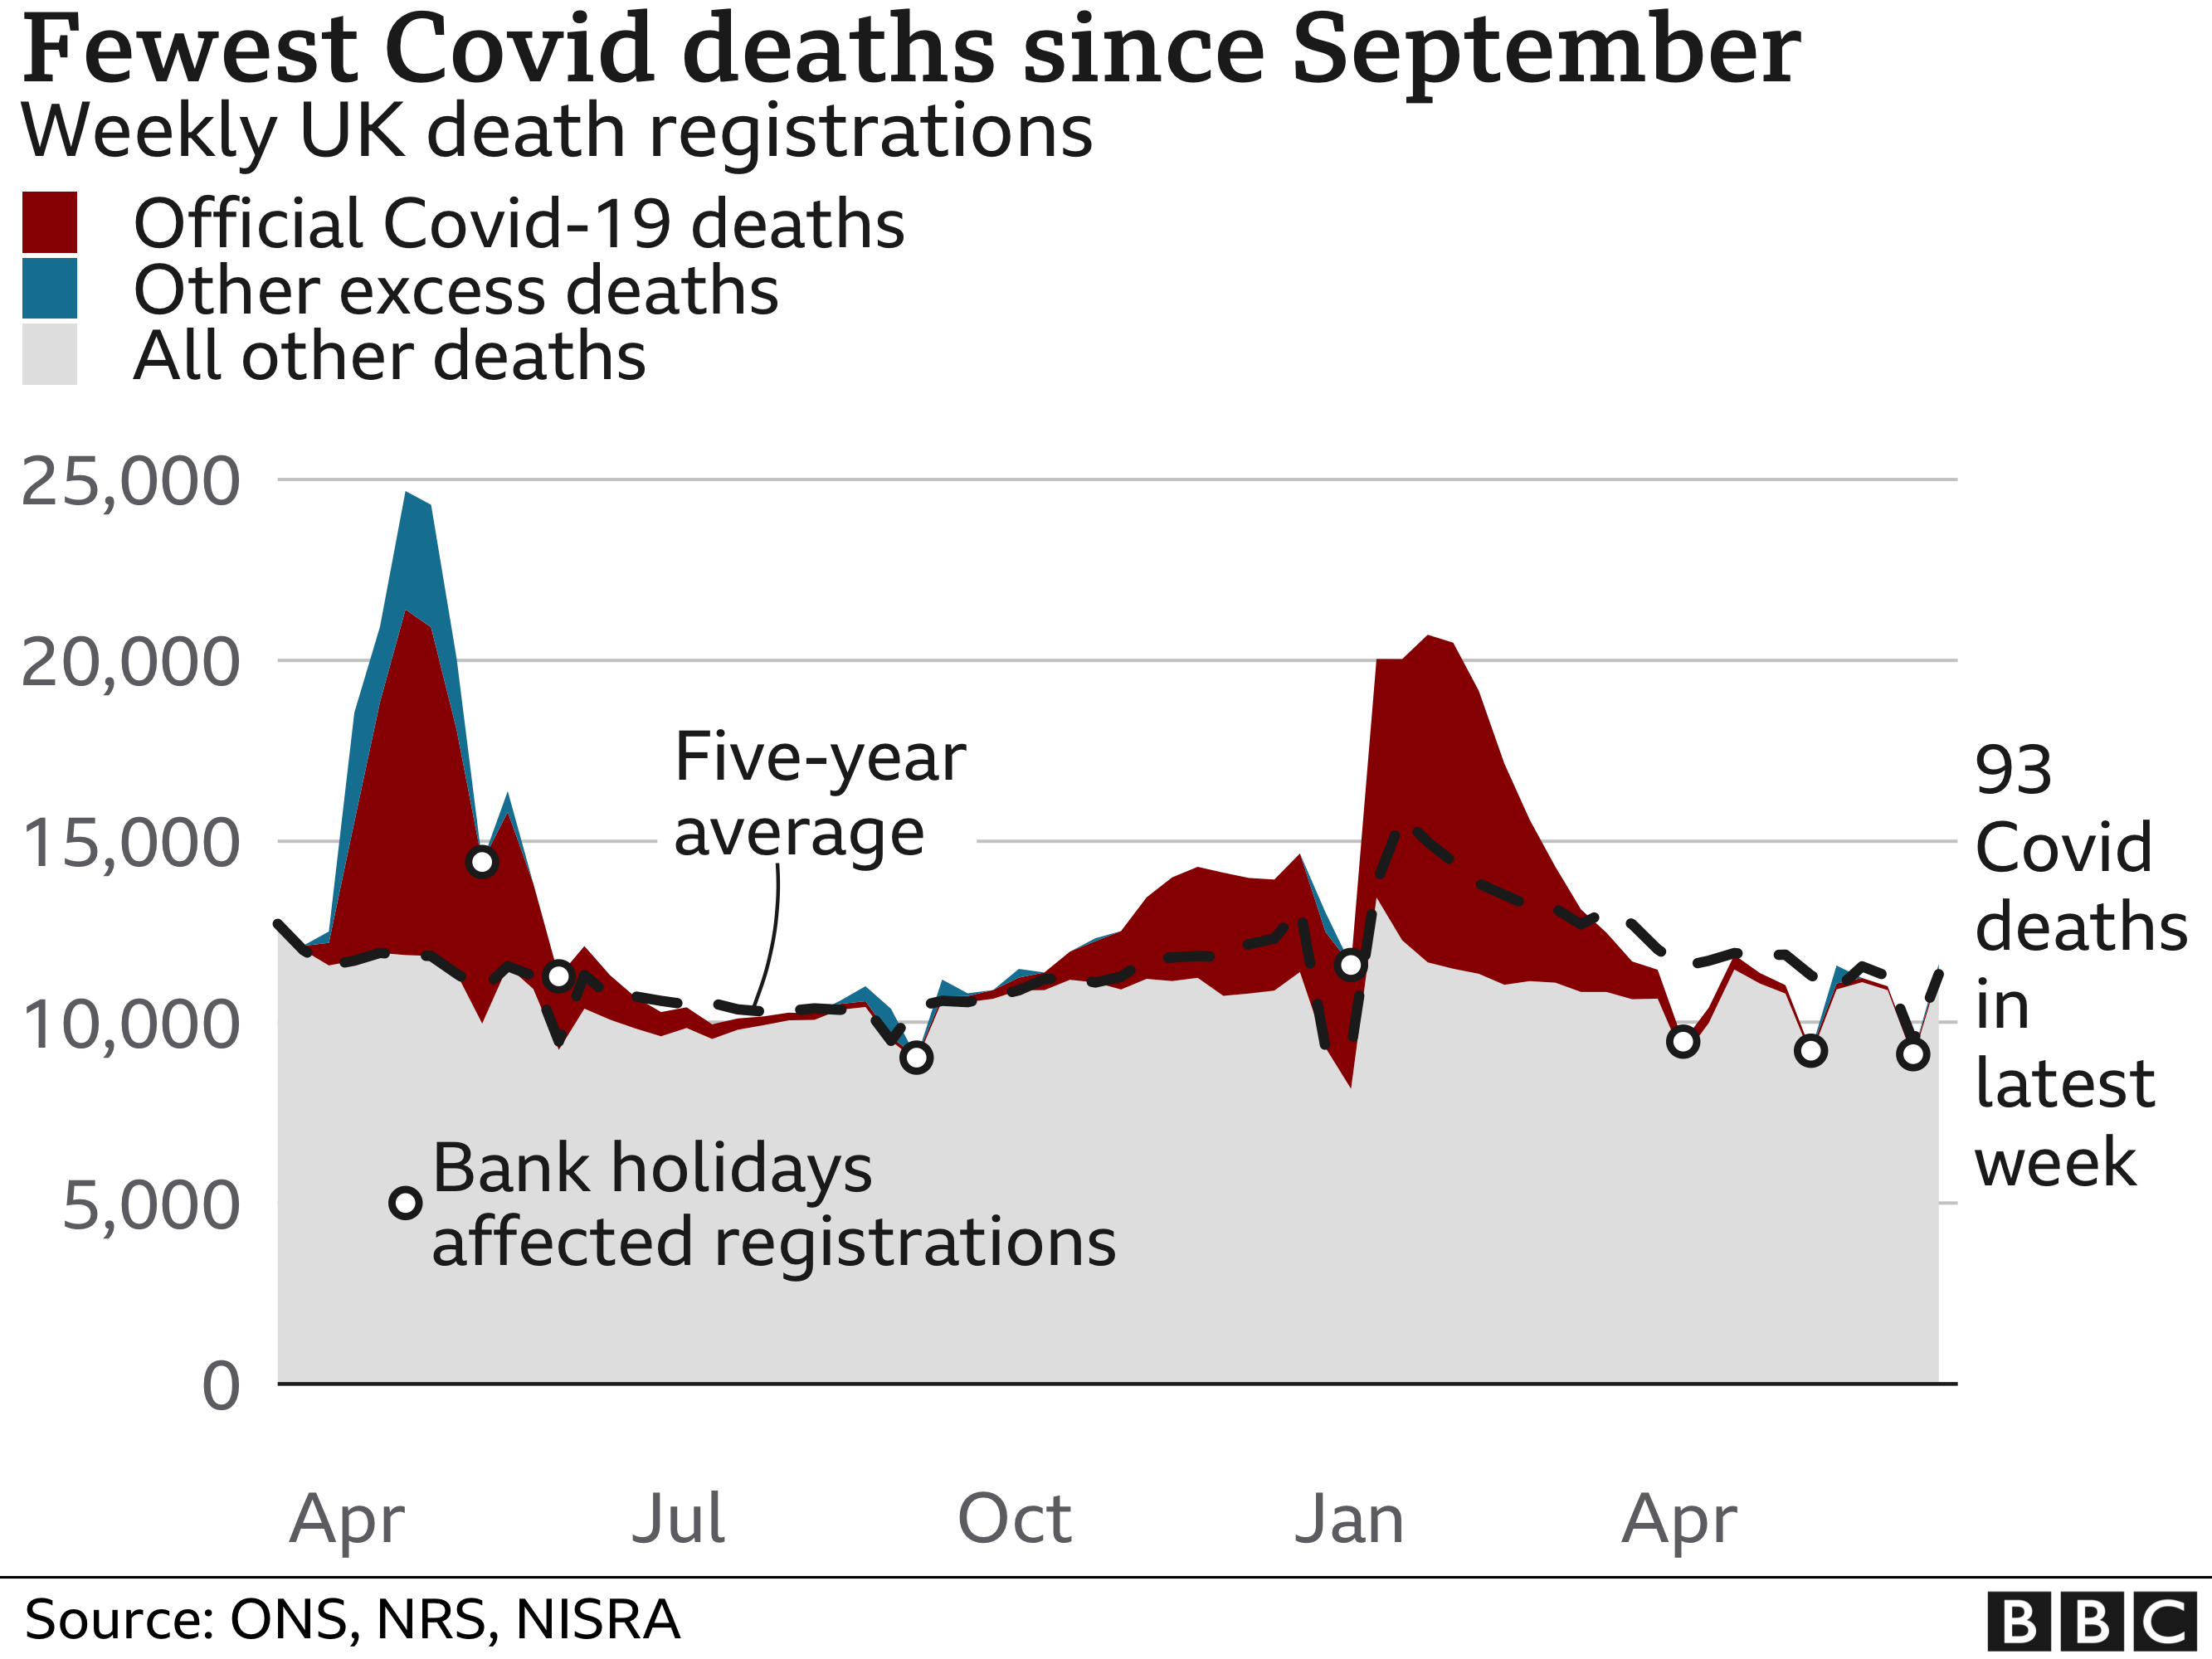 Chart shows fewest Covid deaths since September